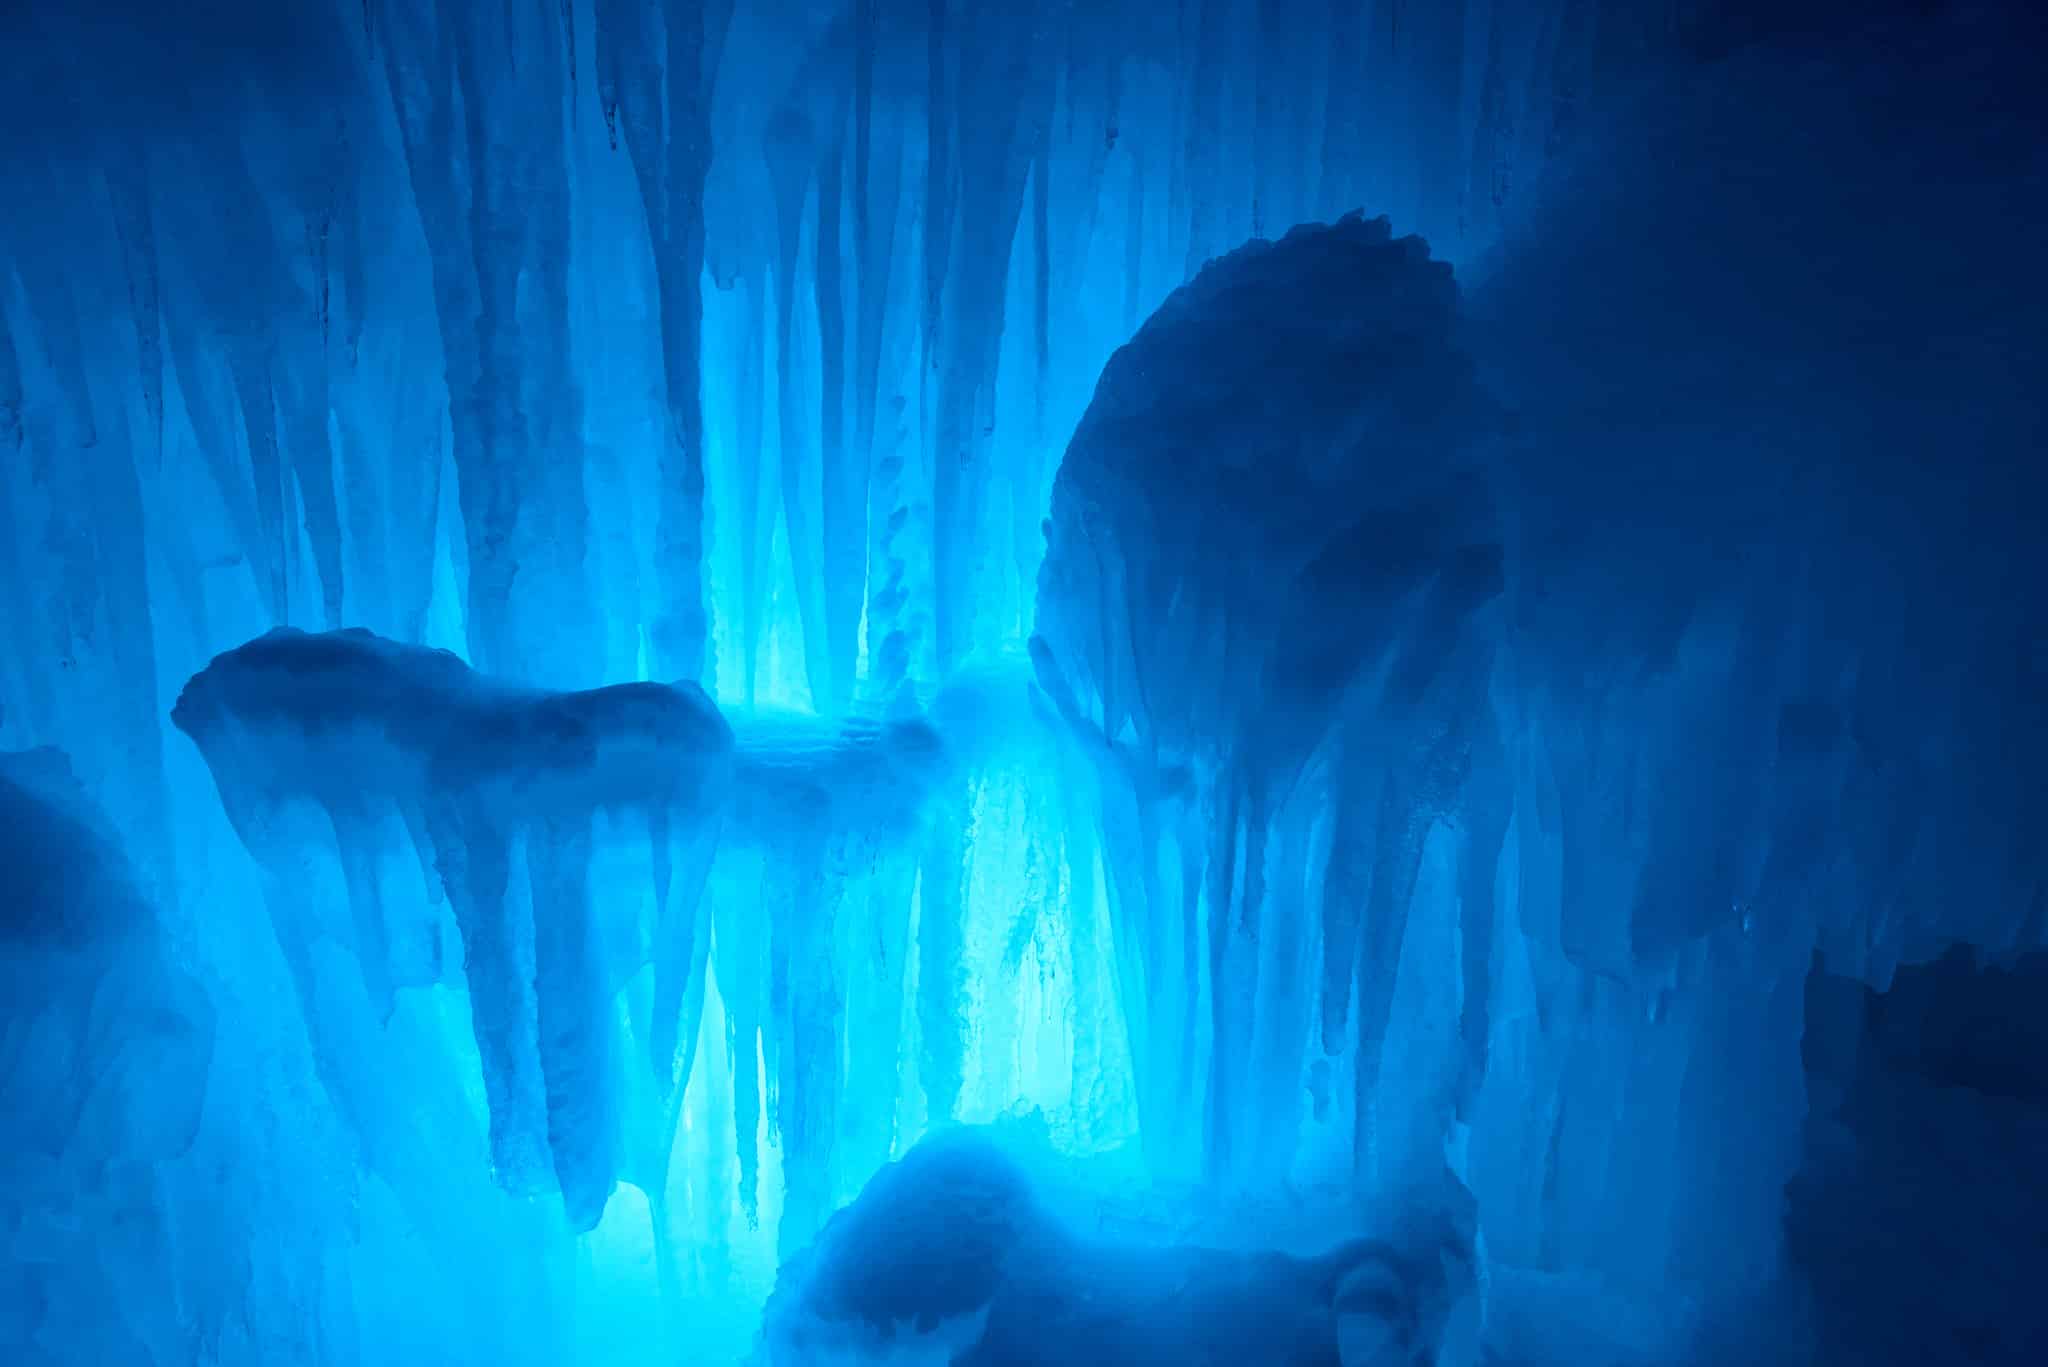 Traveling in USA: Ice castles in new Hampshire